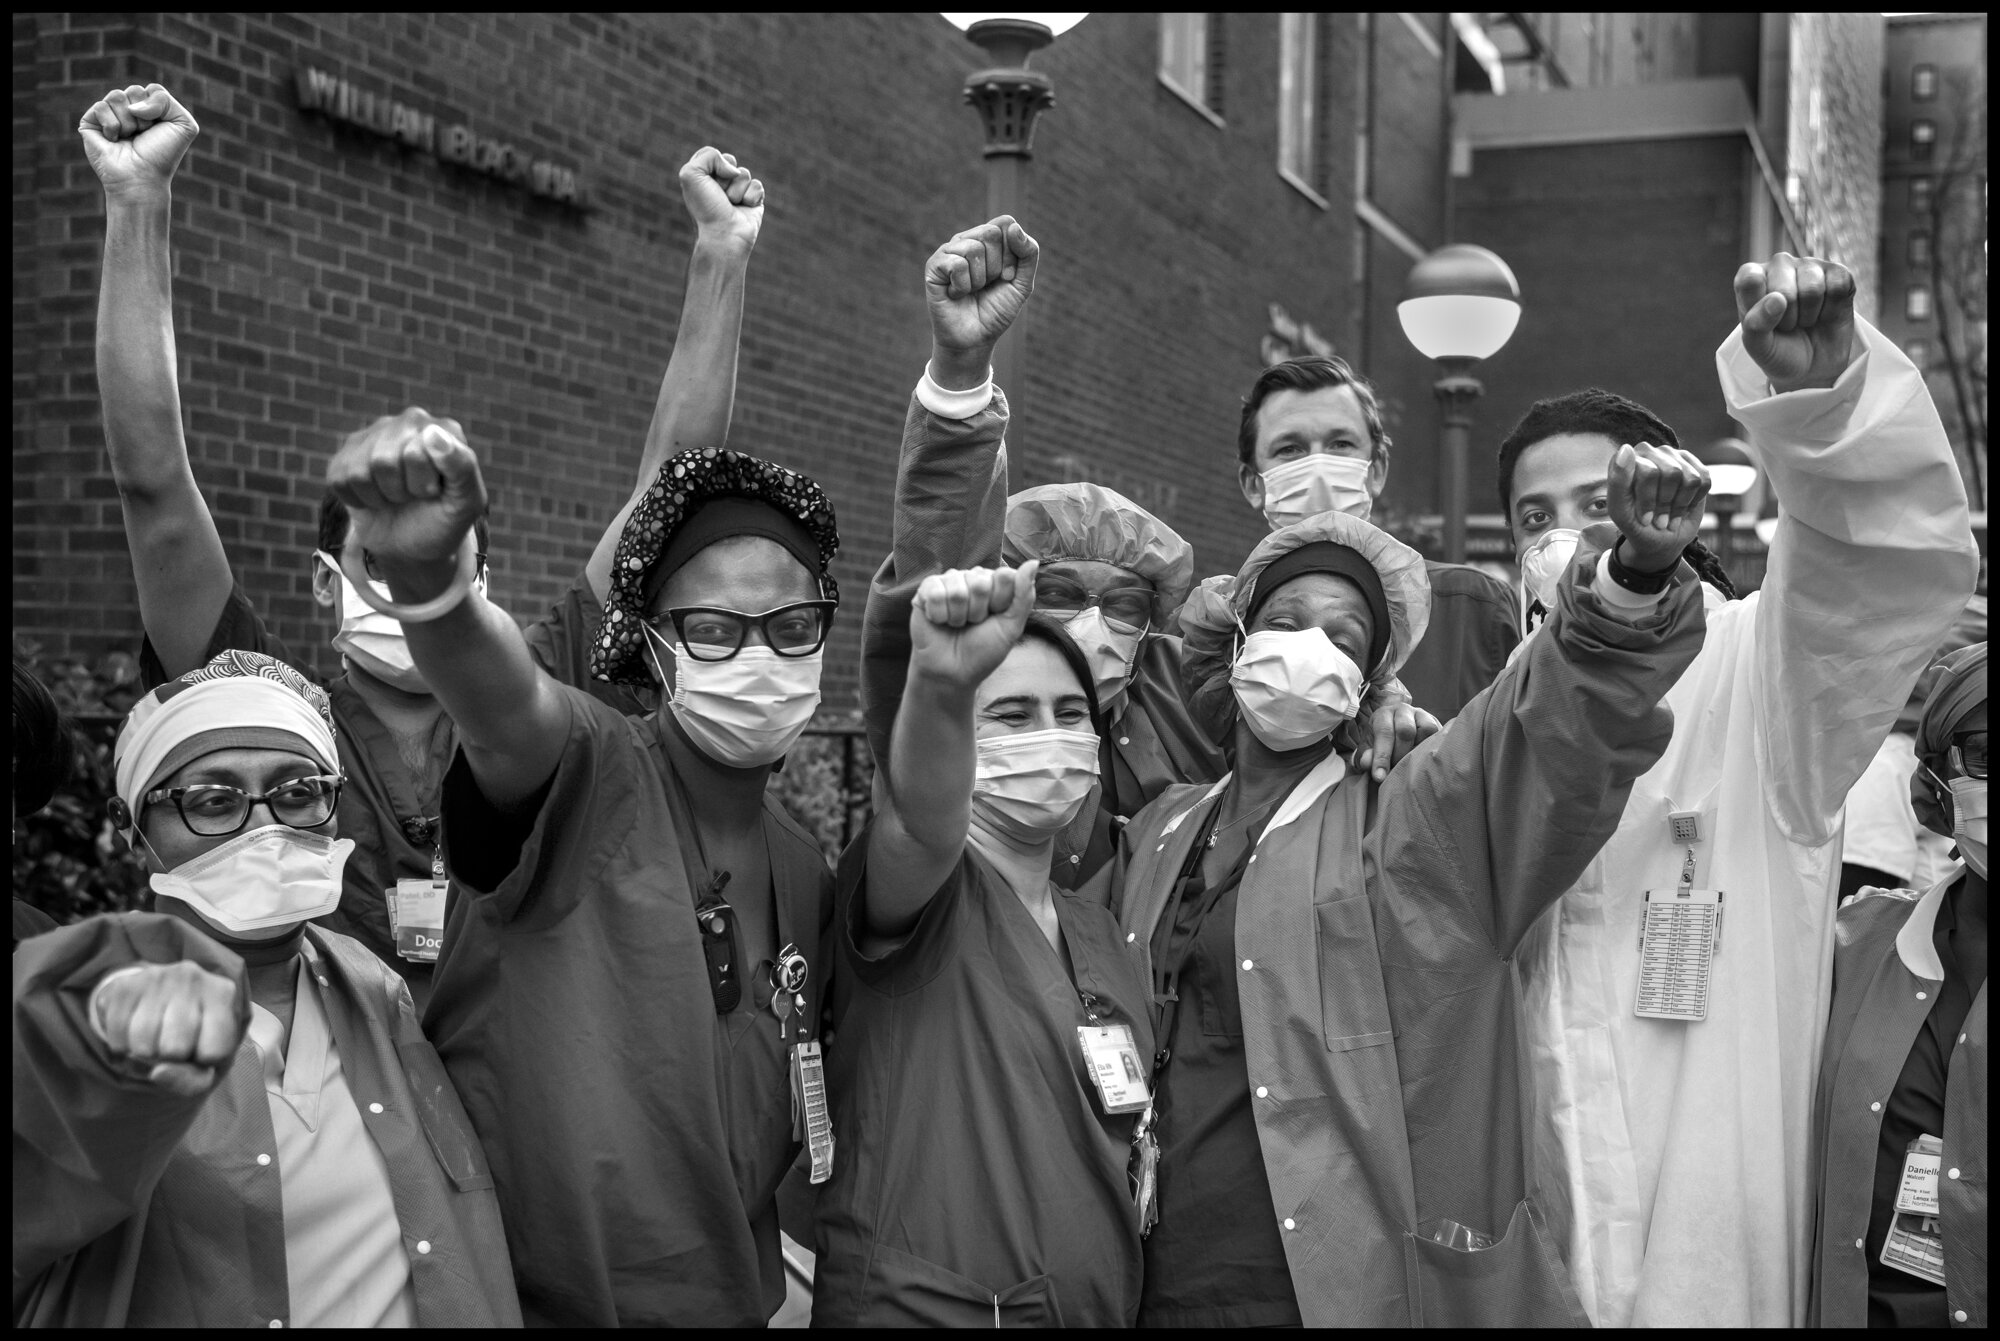  A group of ICU nurses from Lenox Hill Hospital.   May 3, 2020. © Peter Turnley.   ID# 36-030 